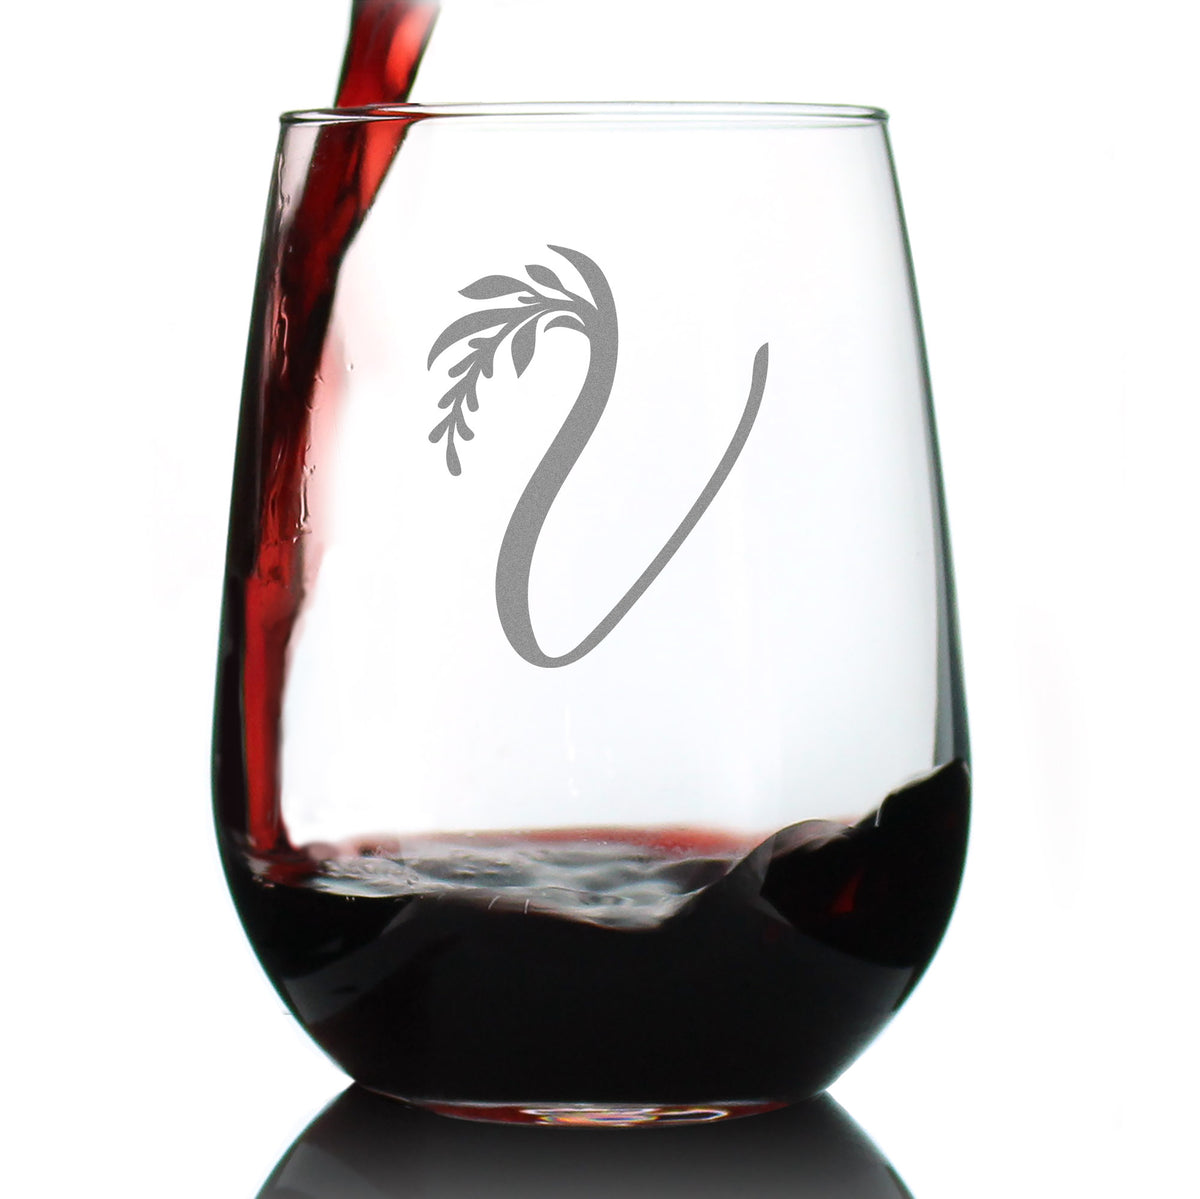 Monogram Floral Letter V - Stemless Wine Glass - Personalized Gifts for Women and Men - Large Engraved 17 Oz Glasses